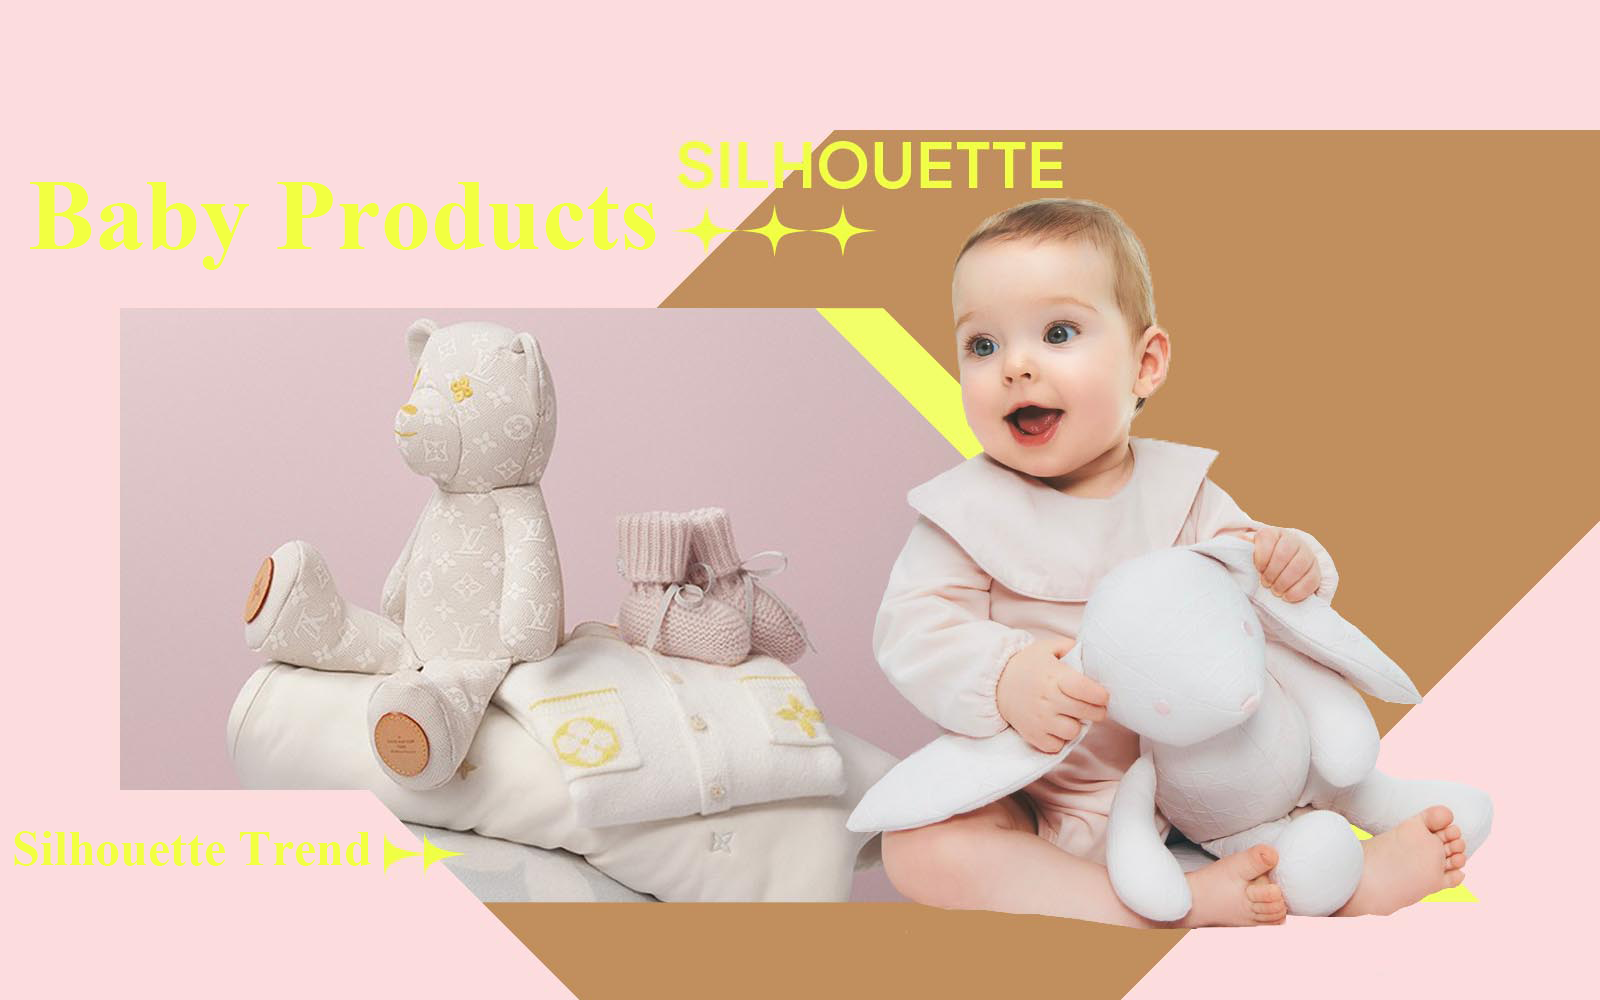 Baby Products -- The Silhouette Trend for Infantswear